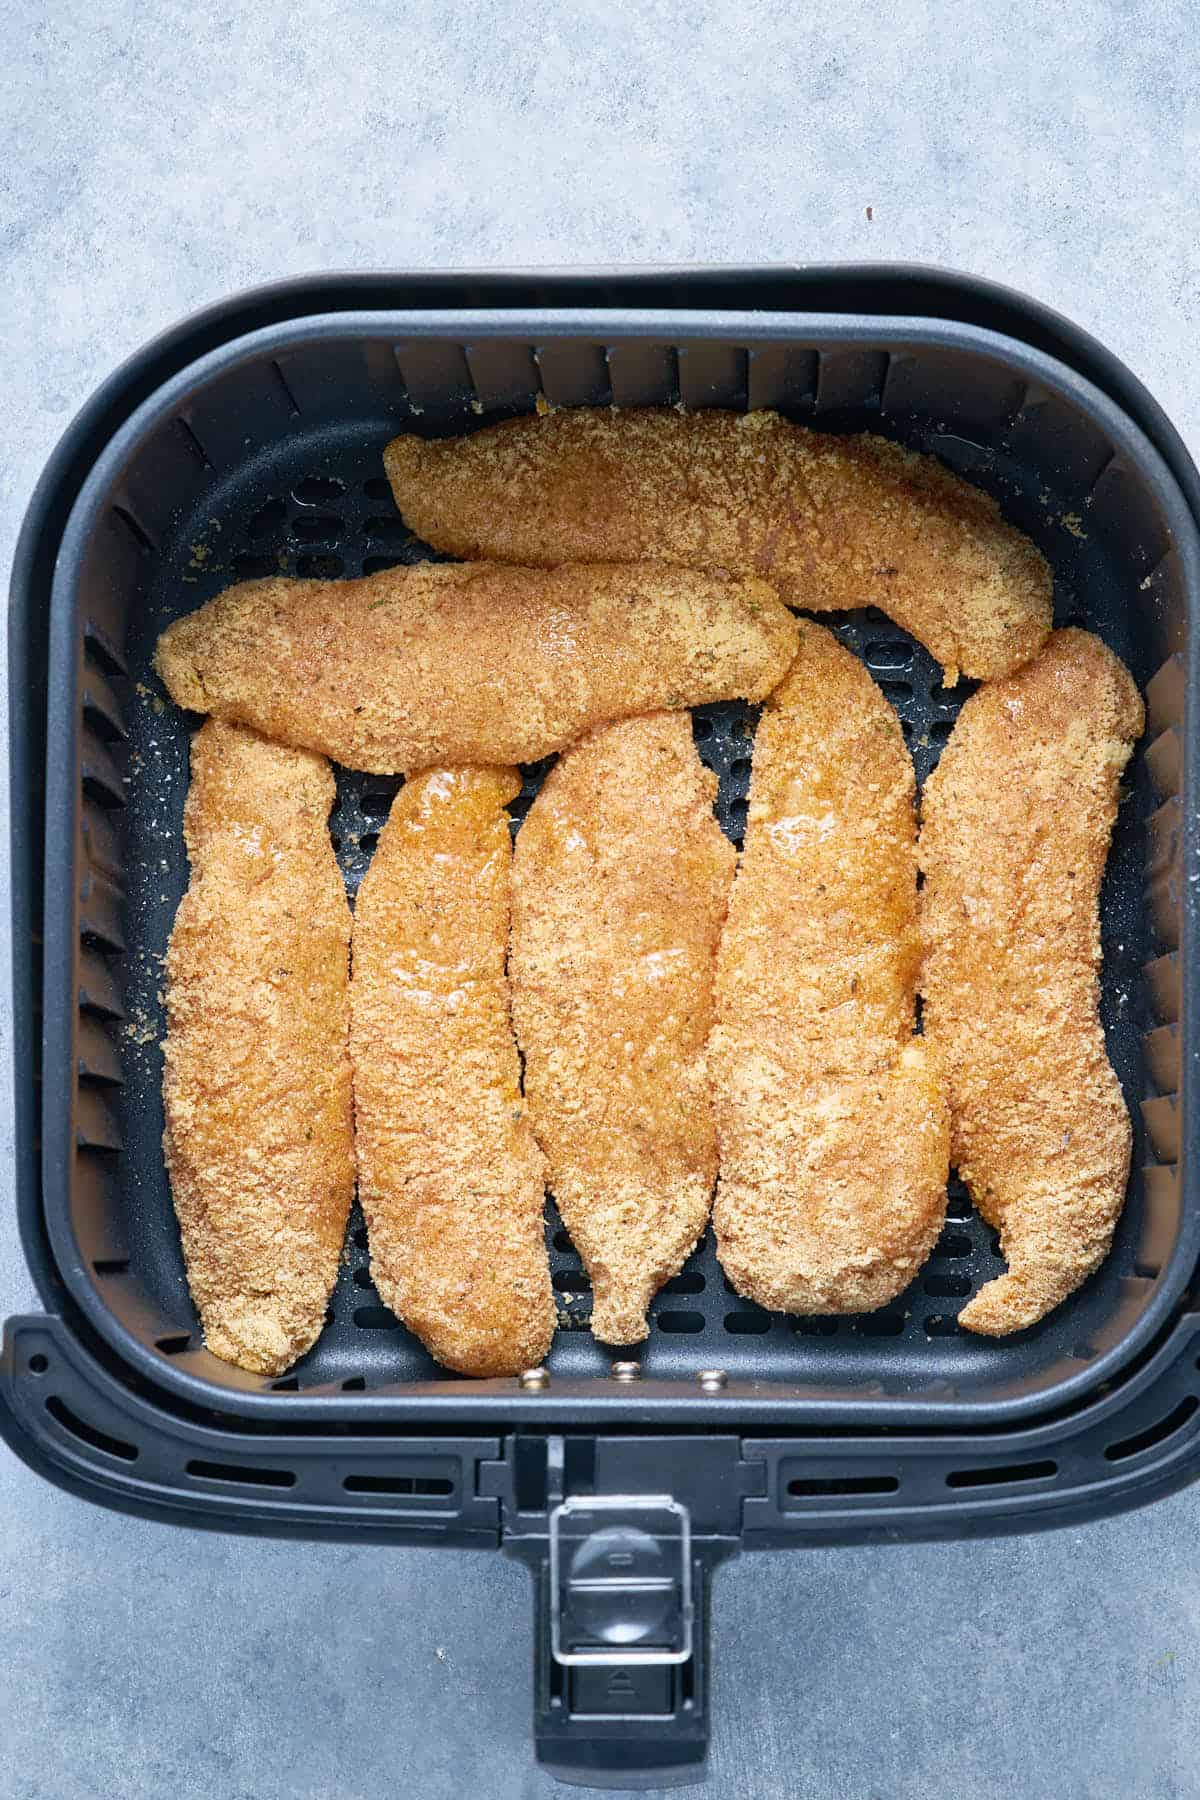 Coated in almond flour with spices, the chicken tenders inside the air fryer before cooking.